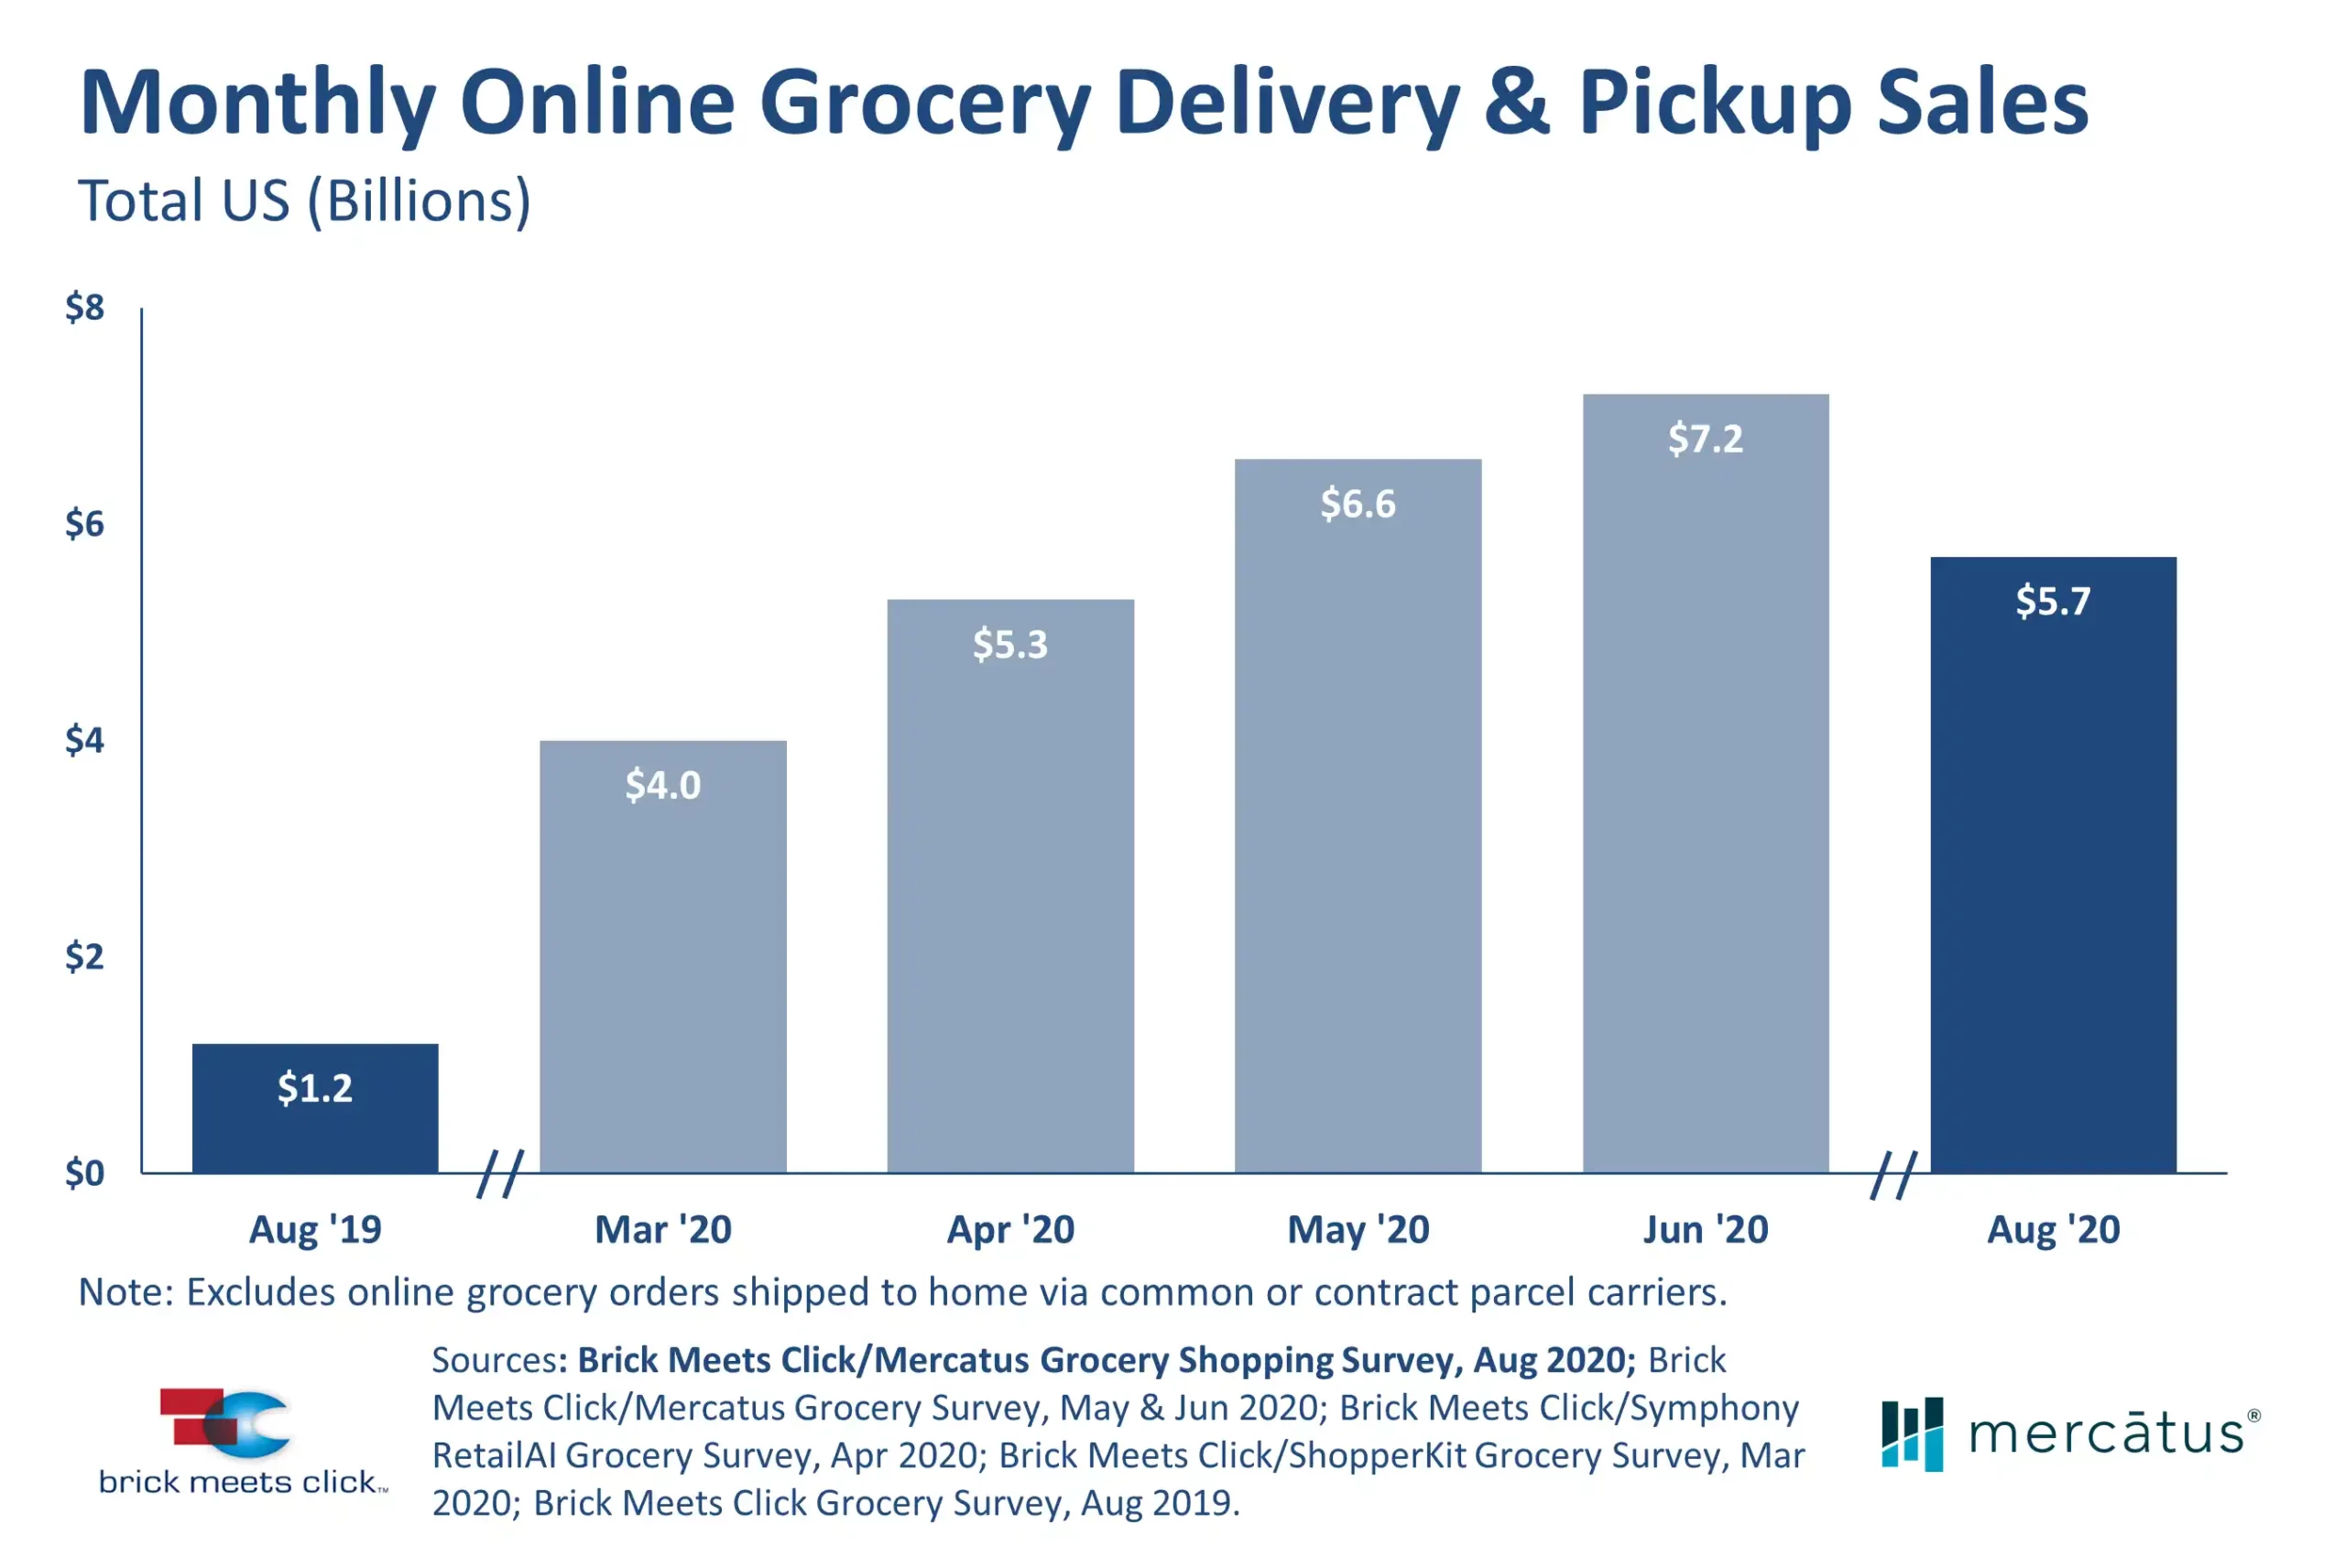 US Online Grocery August KPIs Show Market Rebalancing After COVID Spike